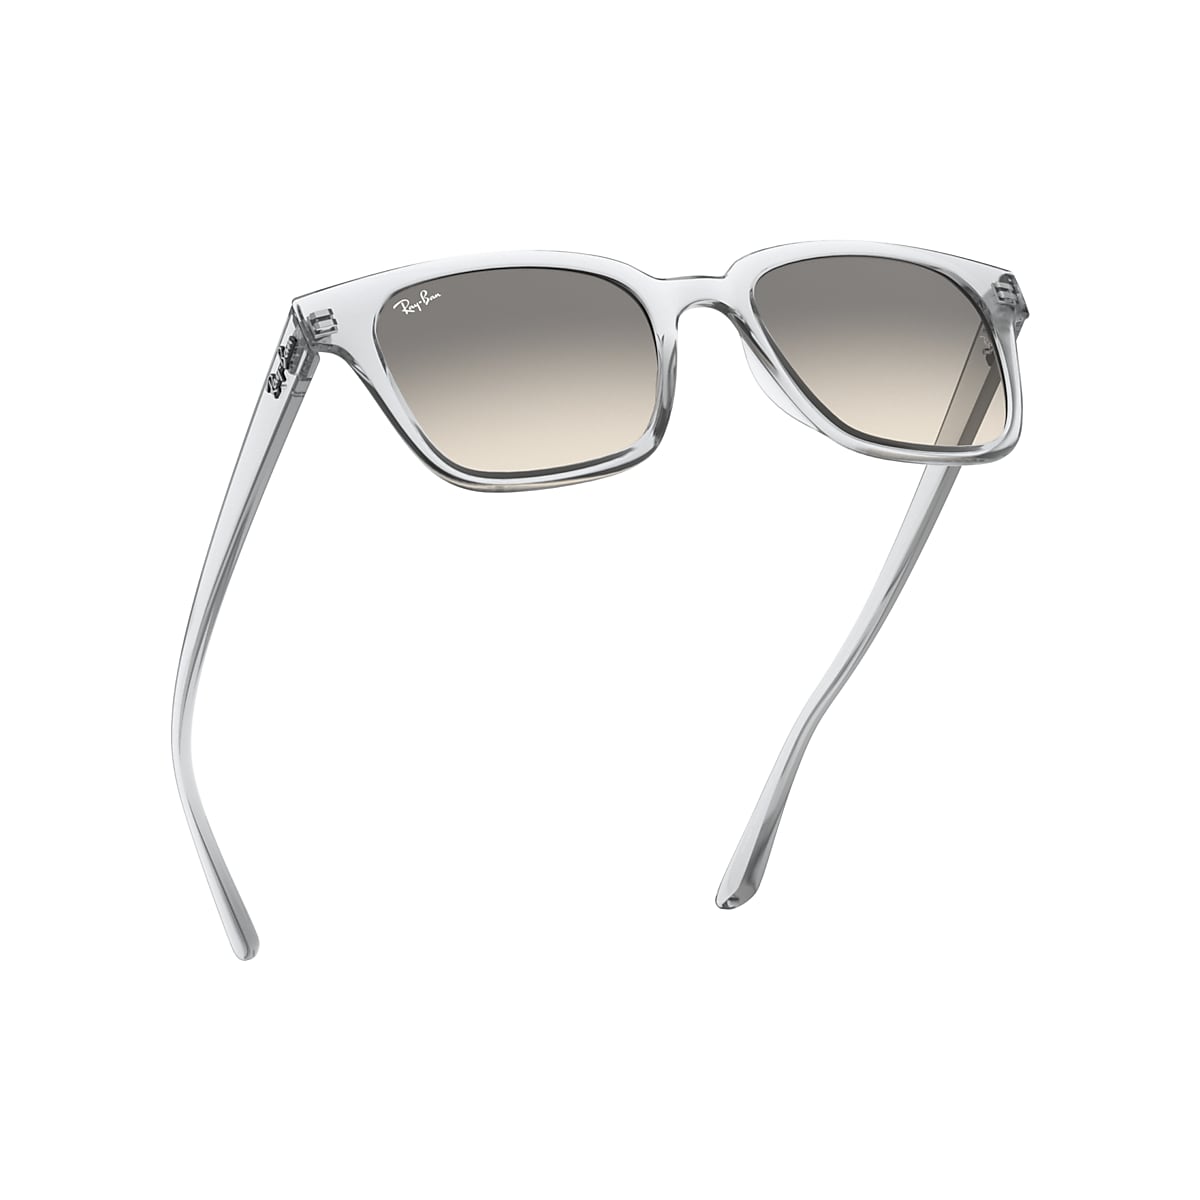 Top 111+ imagen ray ban clear frame - Abzlocal.mx